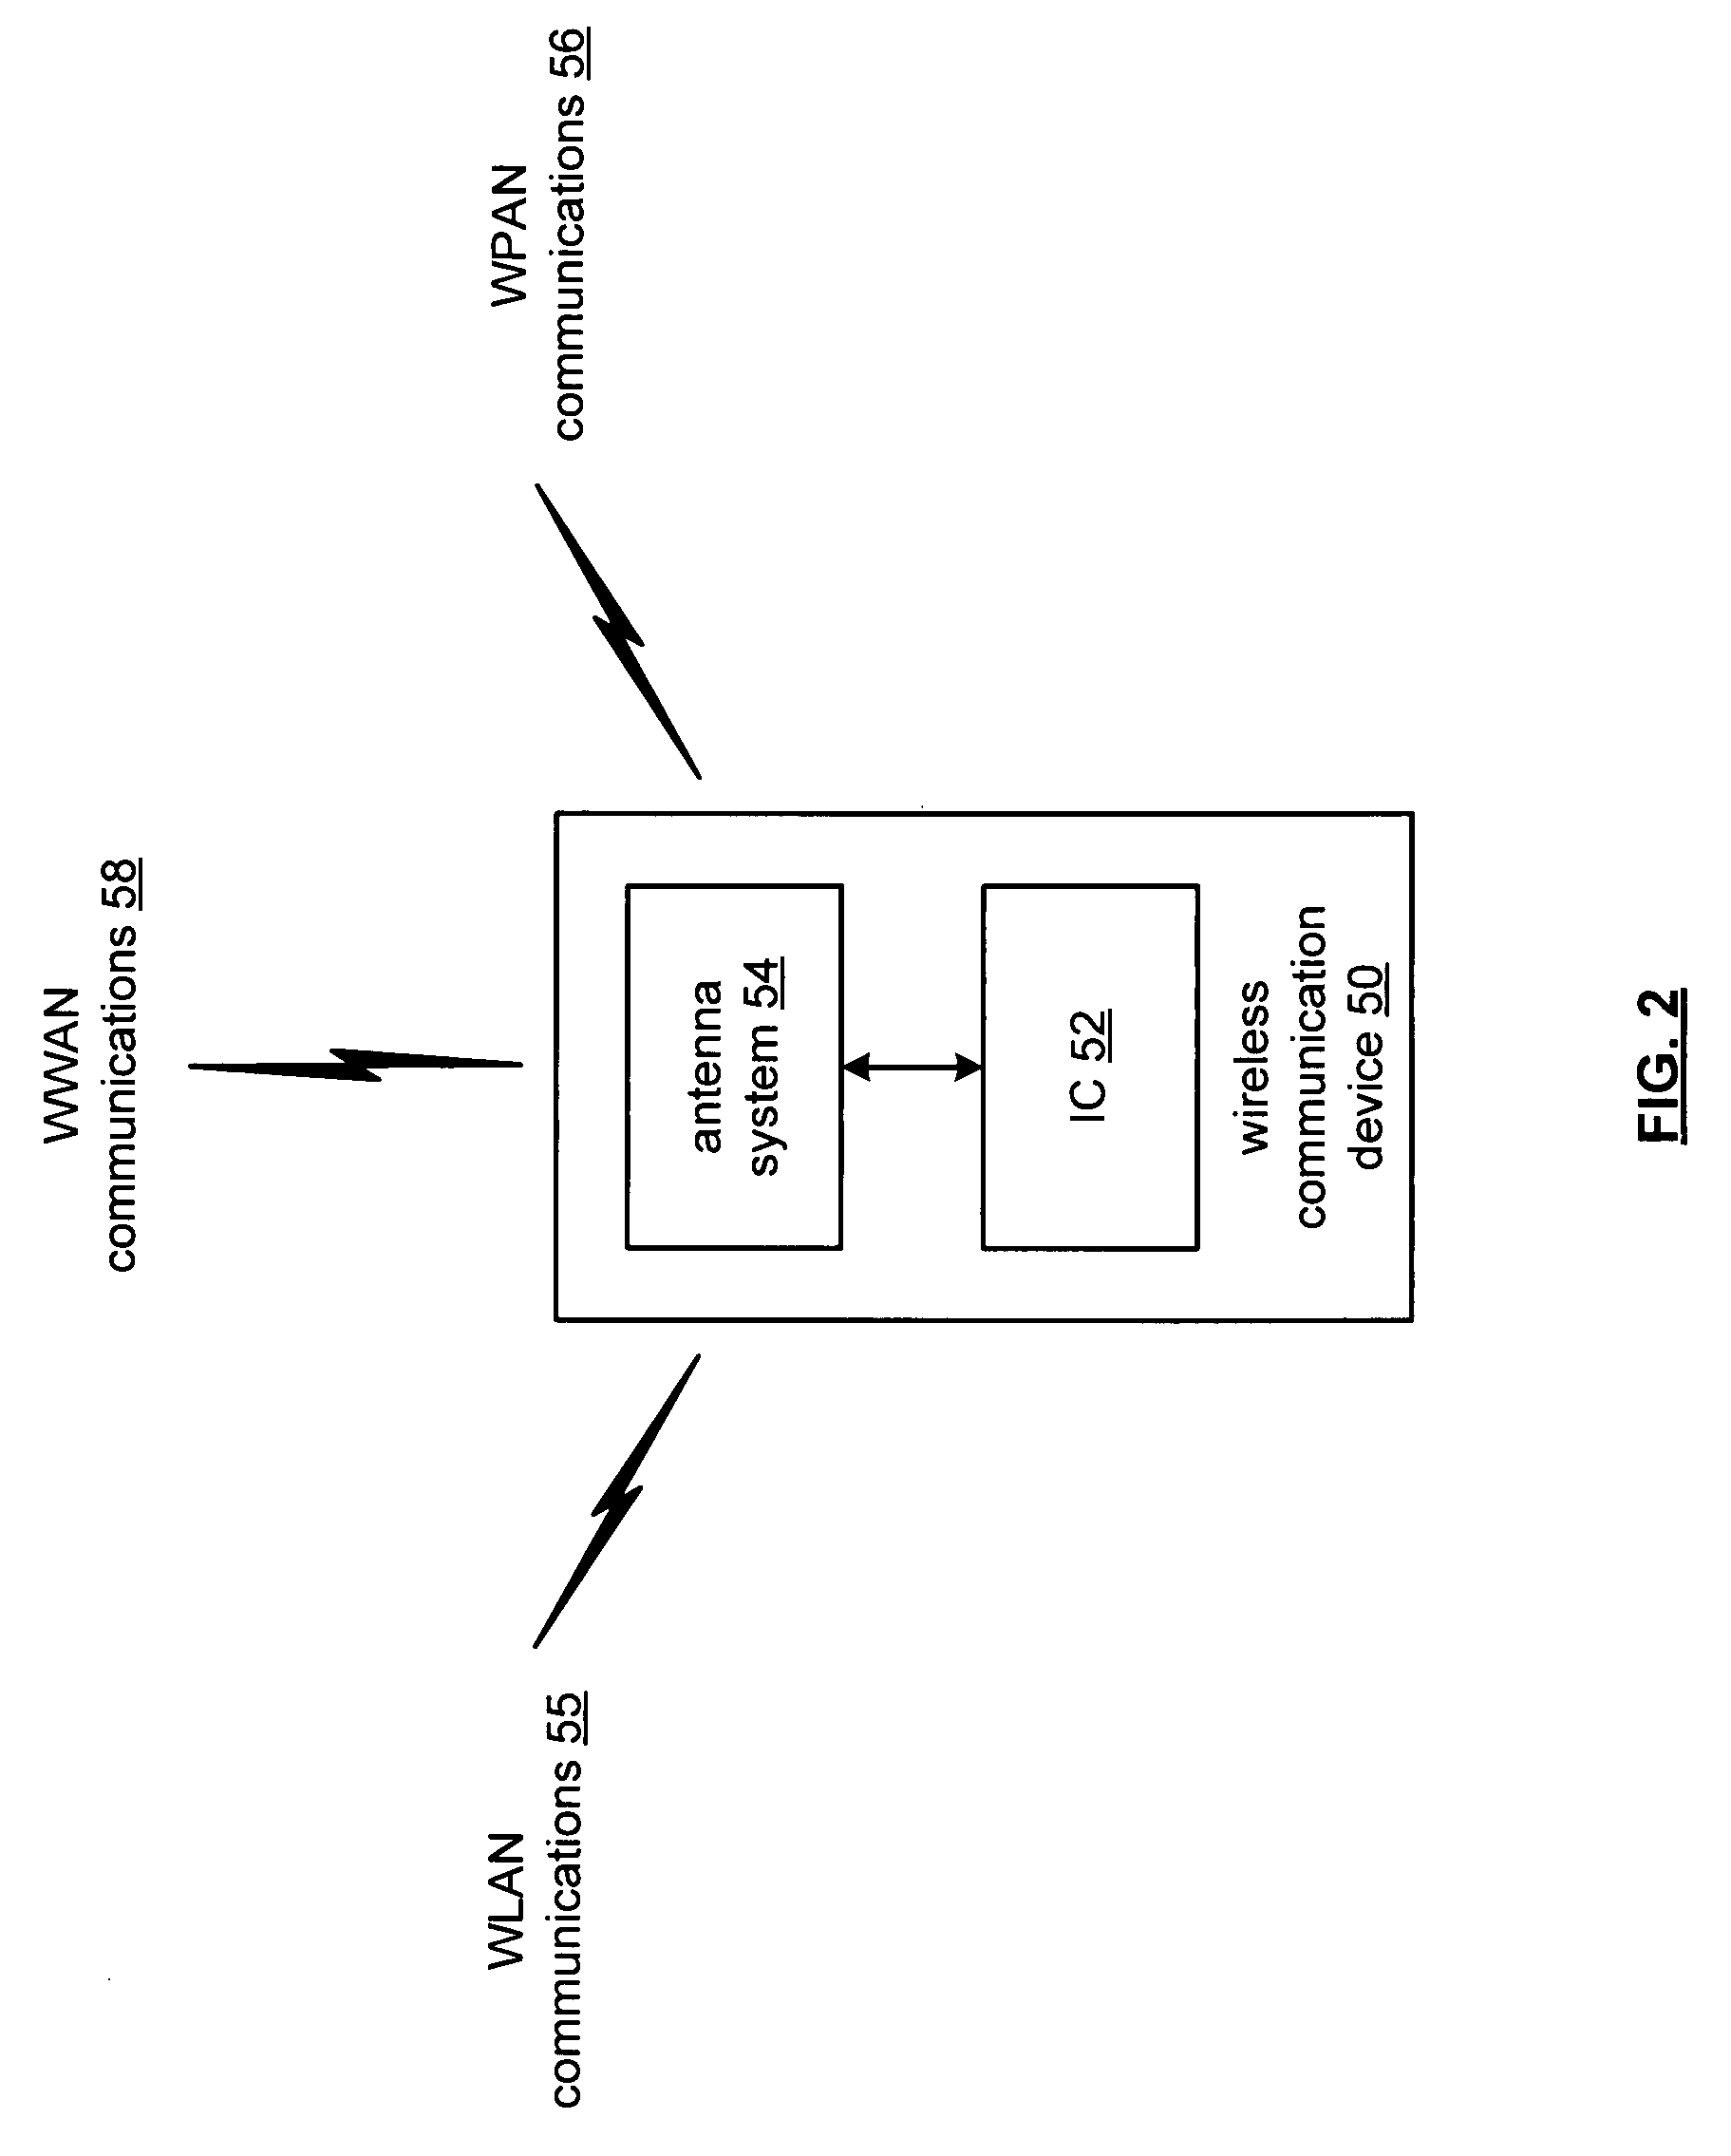 Wireless communication device with programmable antenna system